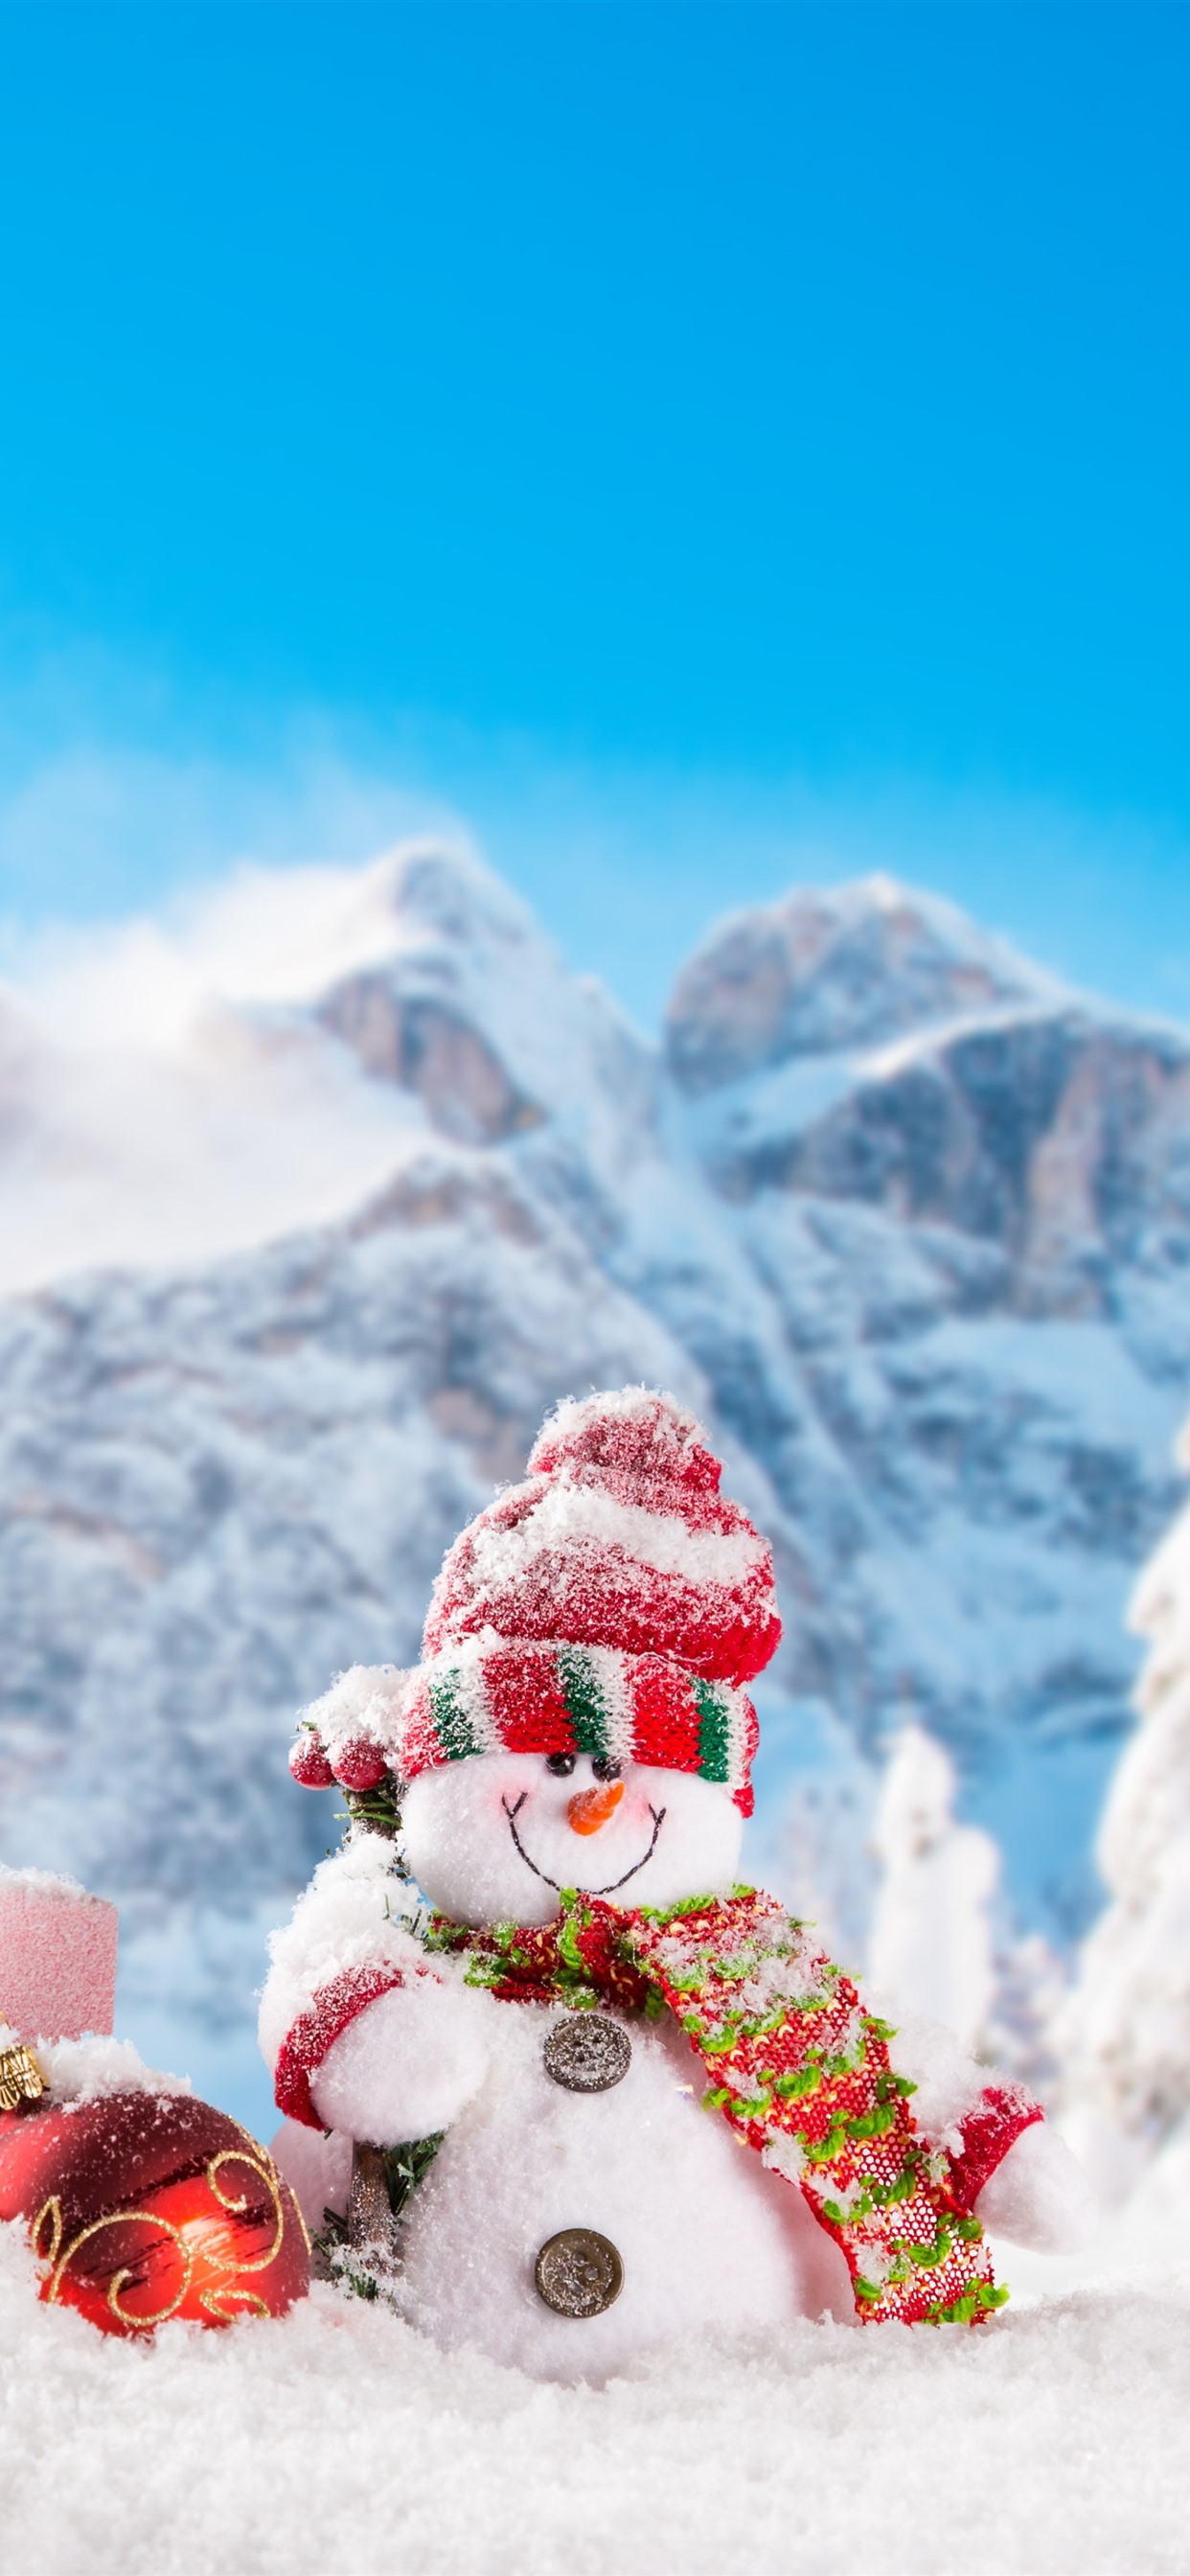 Christmas, Snowmen, Snow, Trees, Mountains, Winter 1242x2688 IPhone 11 Pro XS Max Wallpaper, Background, Picture, Image